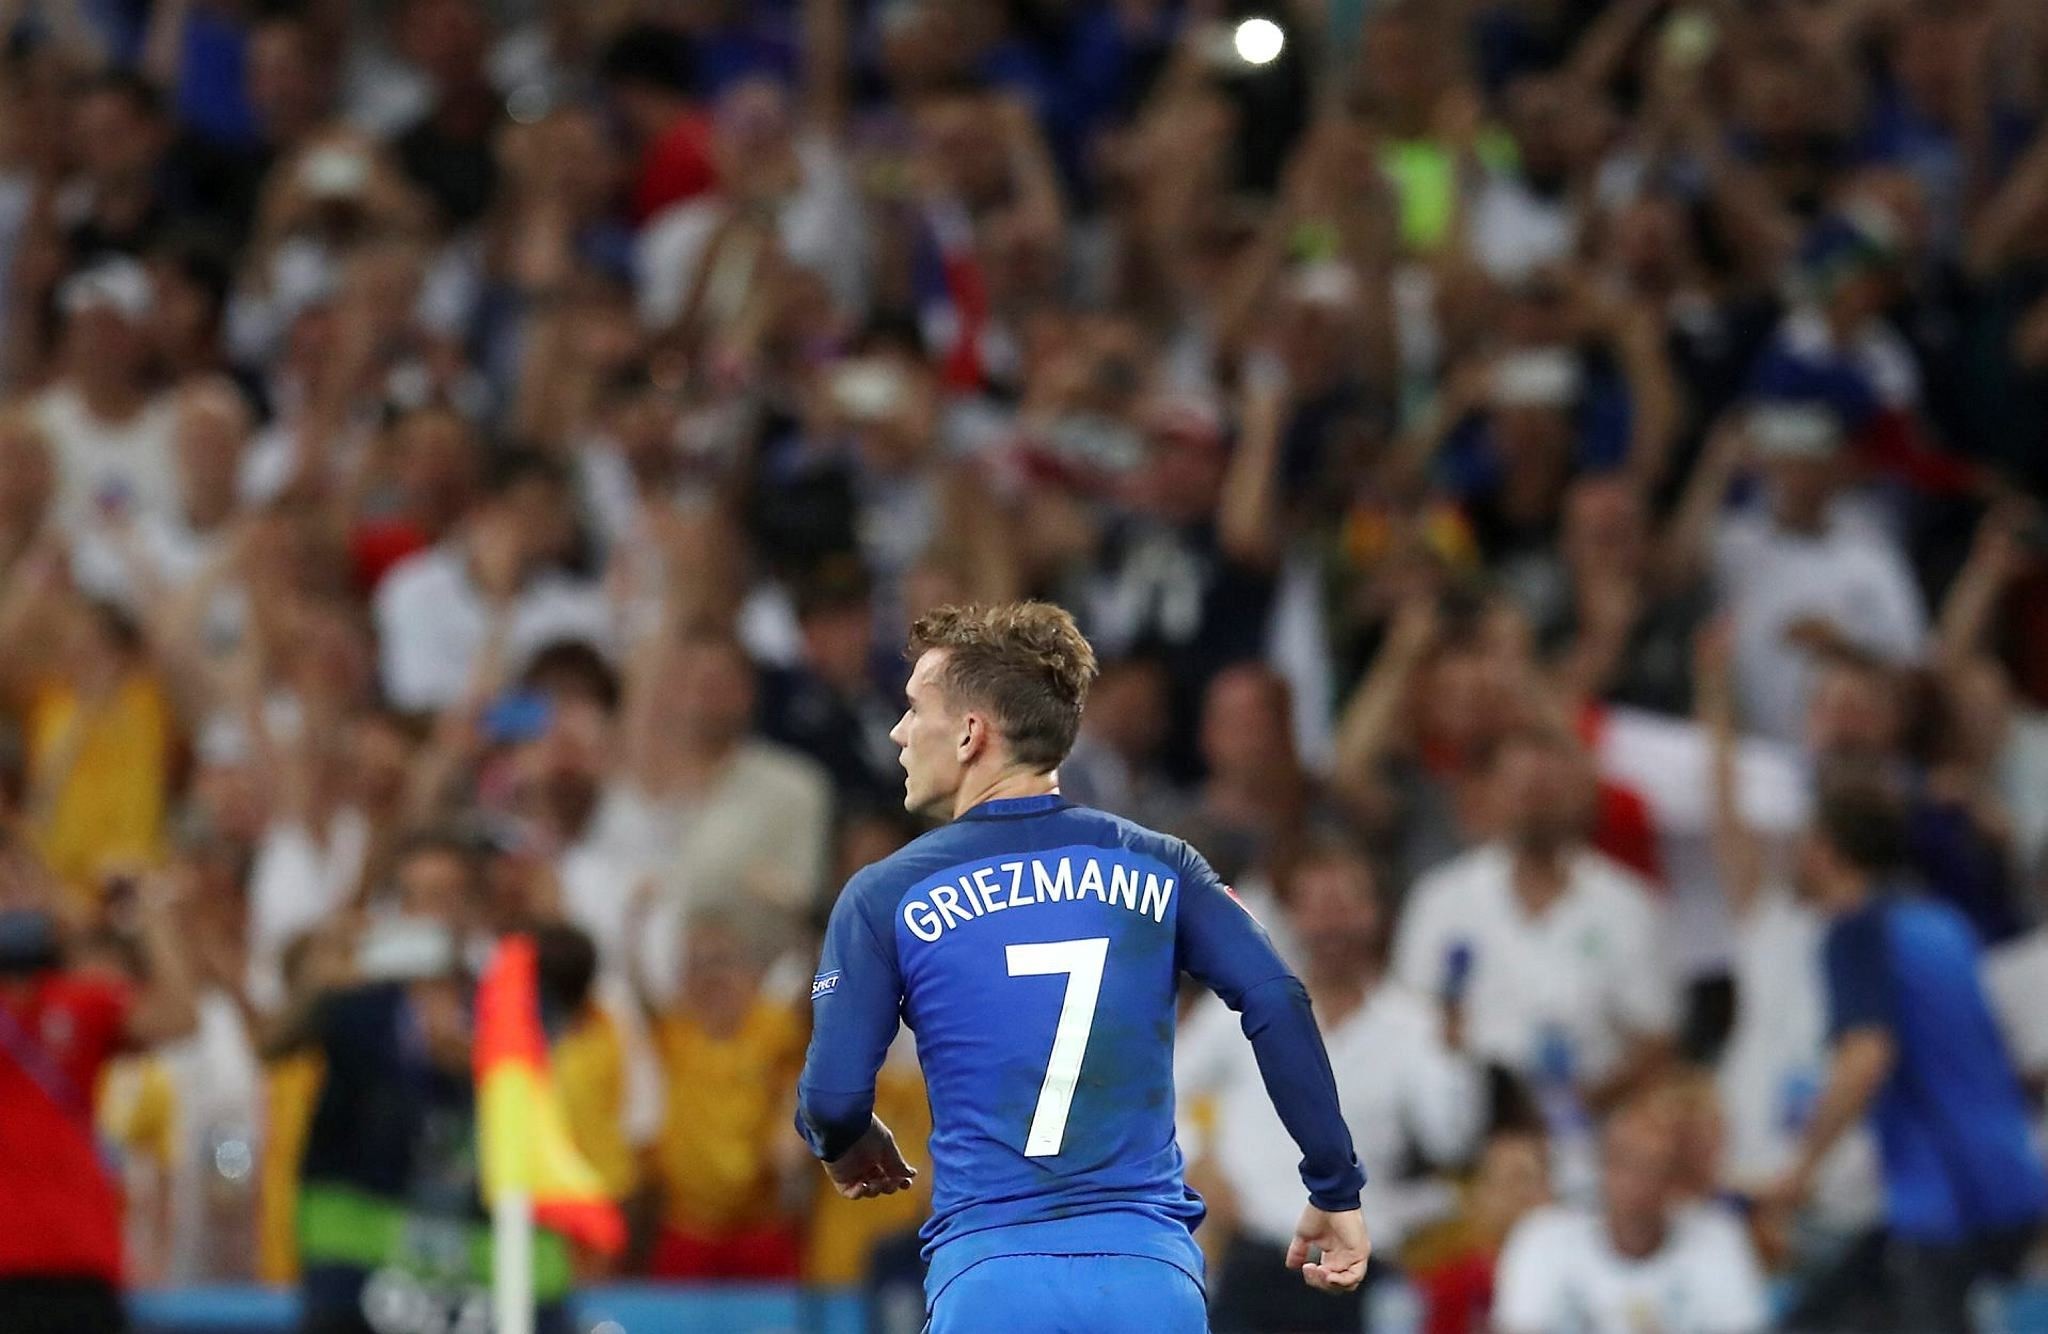 France's Antoine Griezmann celebrates after scoring during the Euro 2016 semifinal soccer match between Germany and France. (AP Photo)